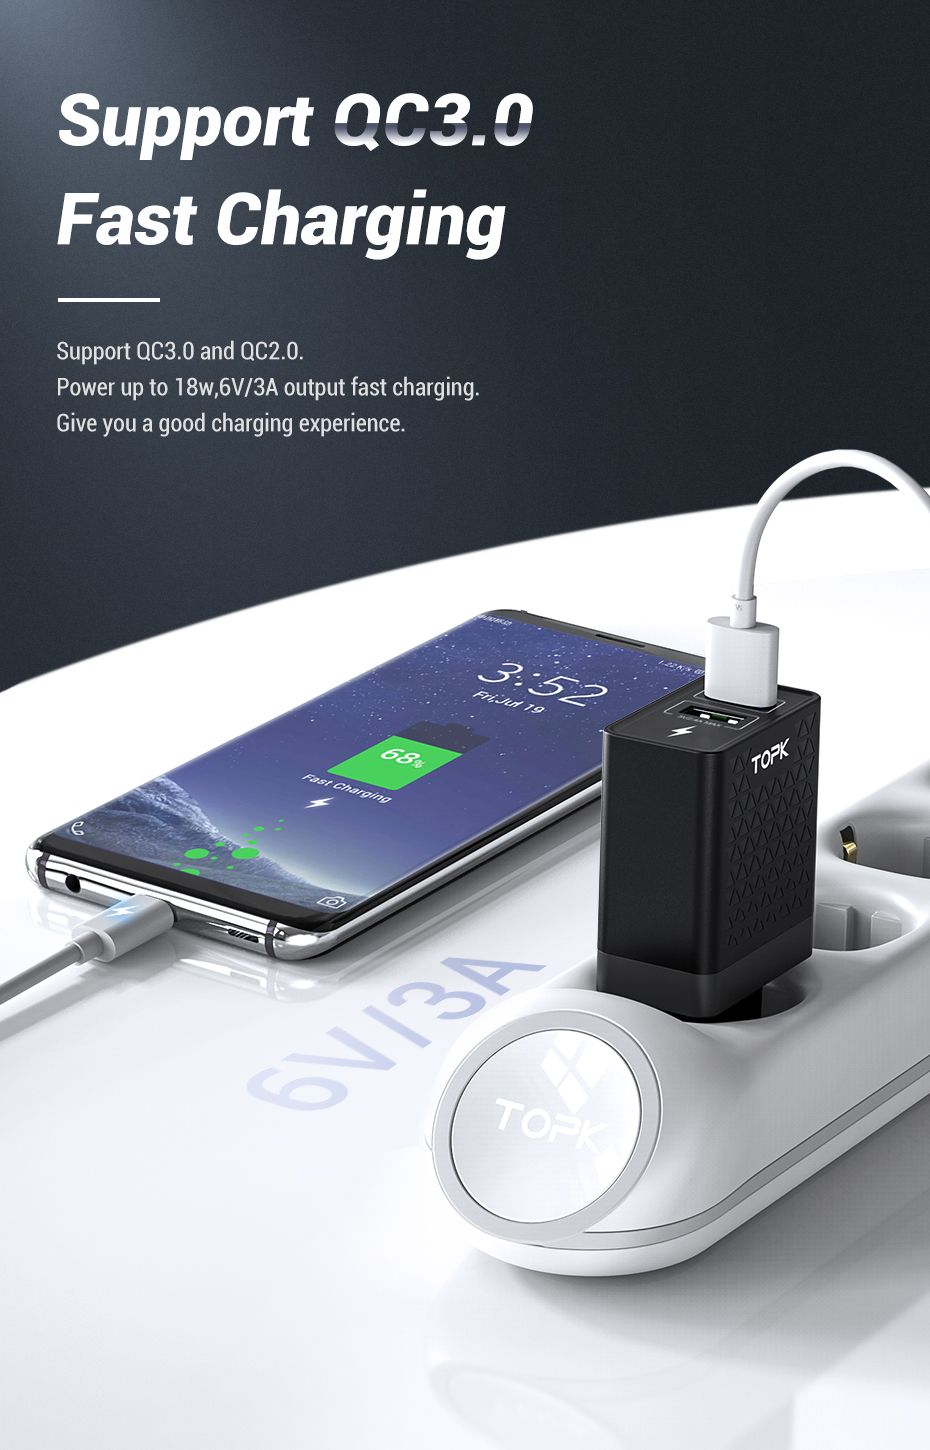 TOPK-28W-QC30-Dual-USB-Port-Fast-Charging-USB-Charger-Adapter-For-iPhone-11-Pro-Huawei-P30-Mate-30-9-1570246